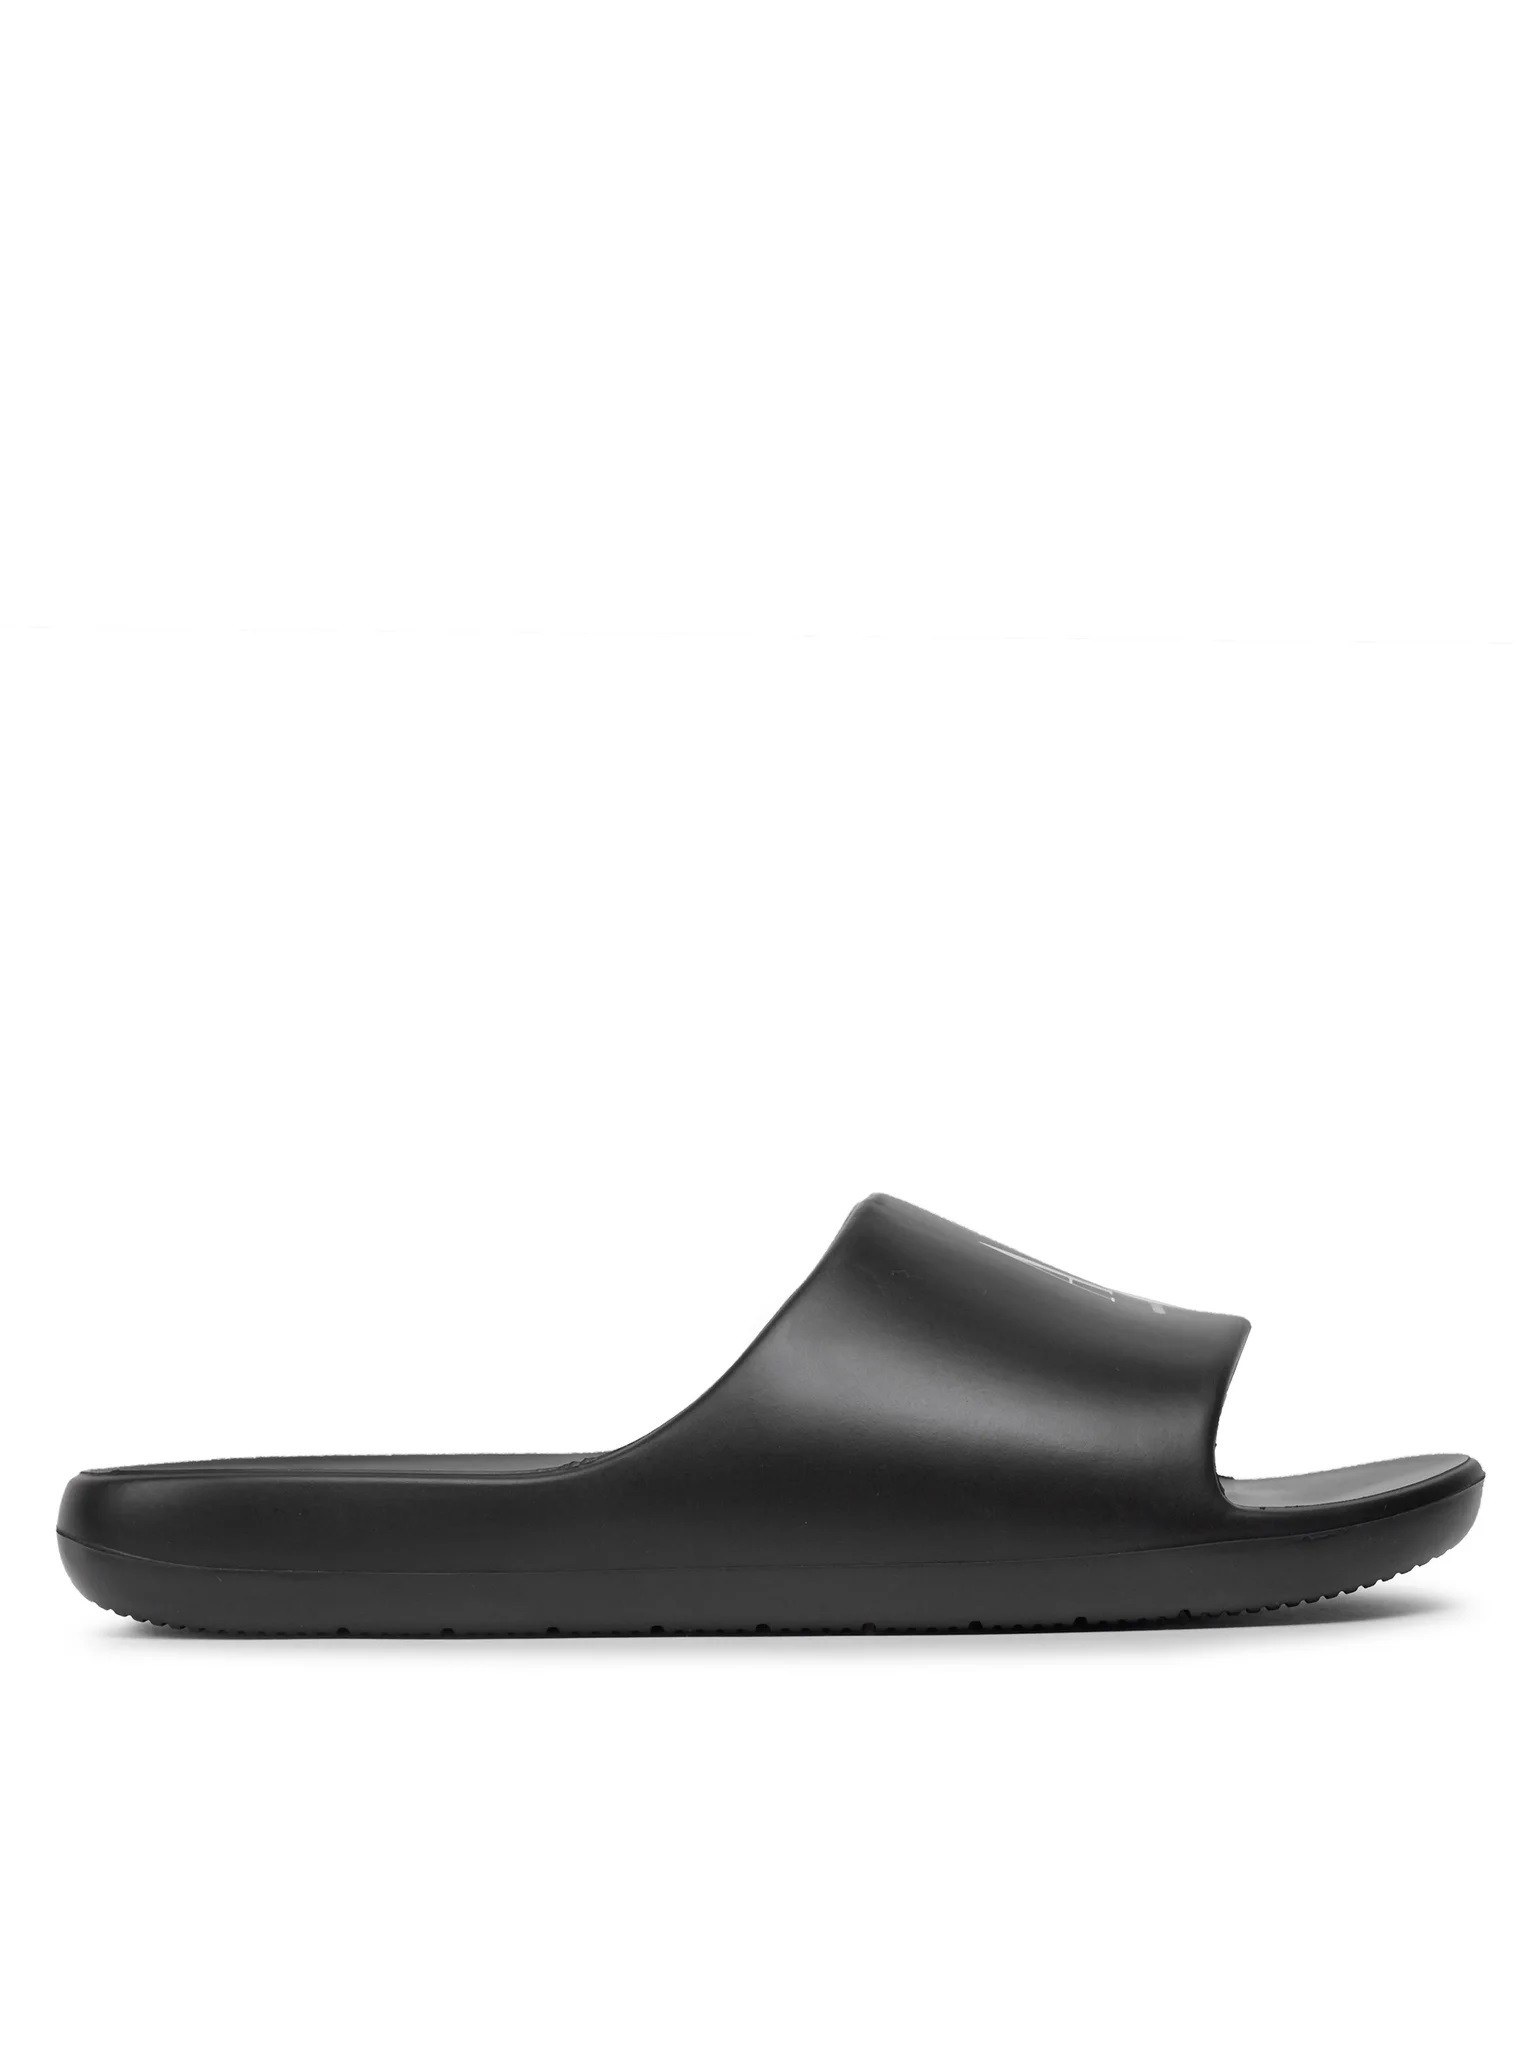 Slip-On Rubber Sole Slippers